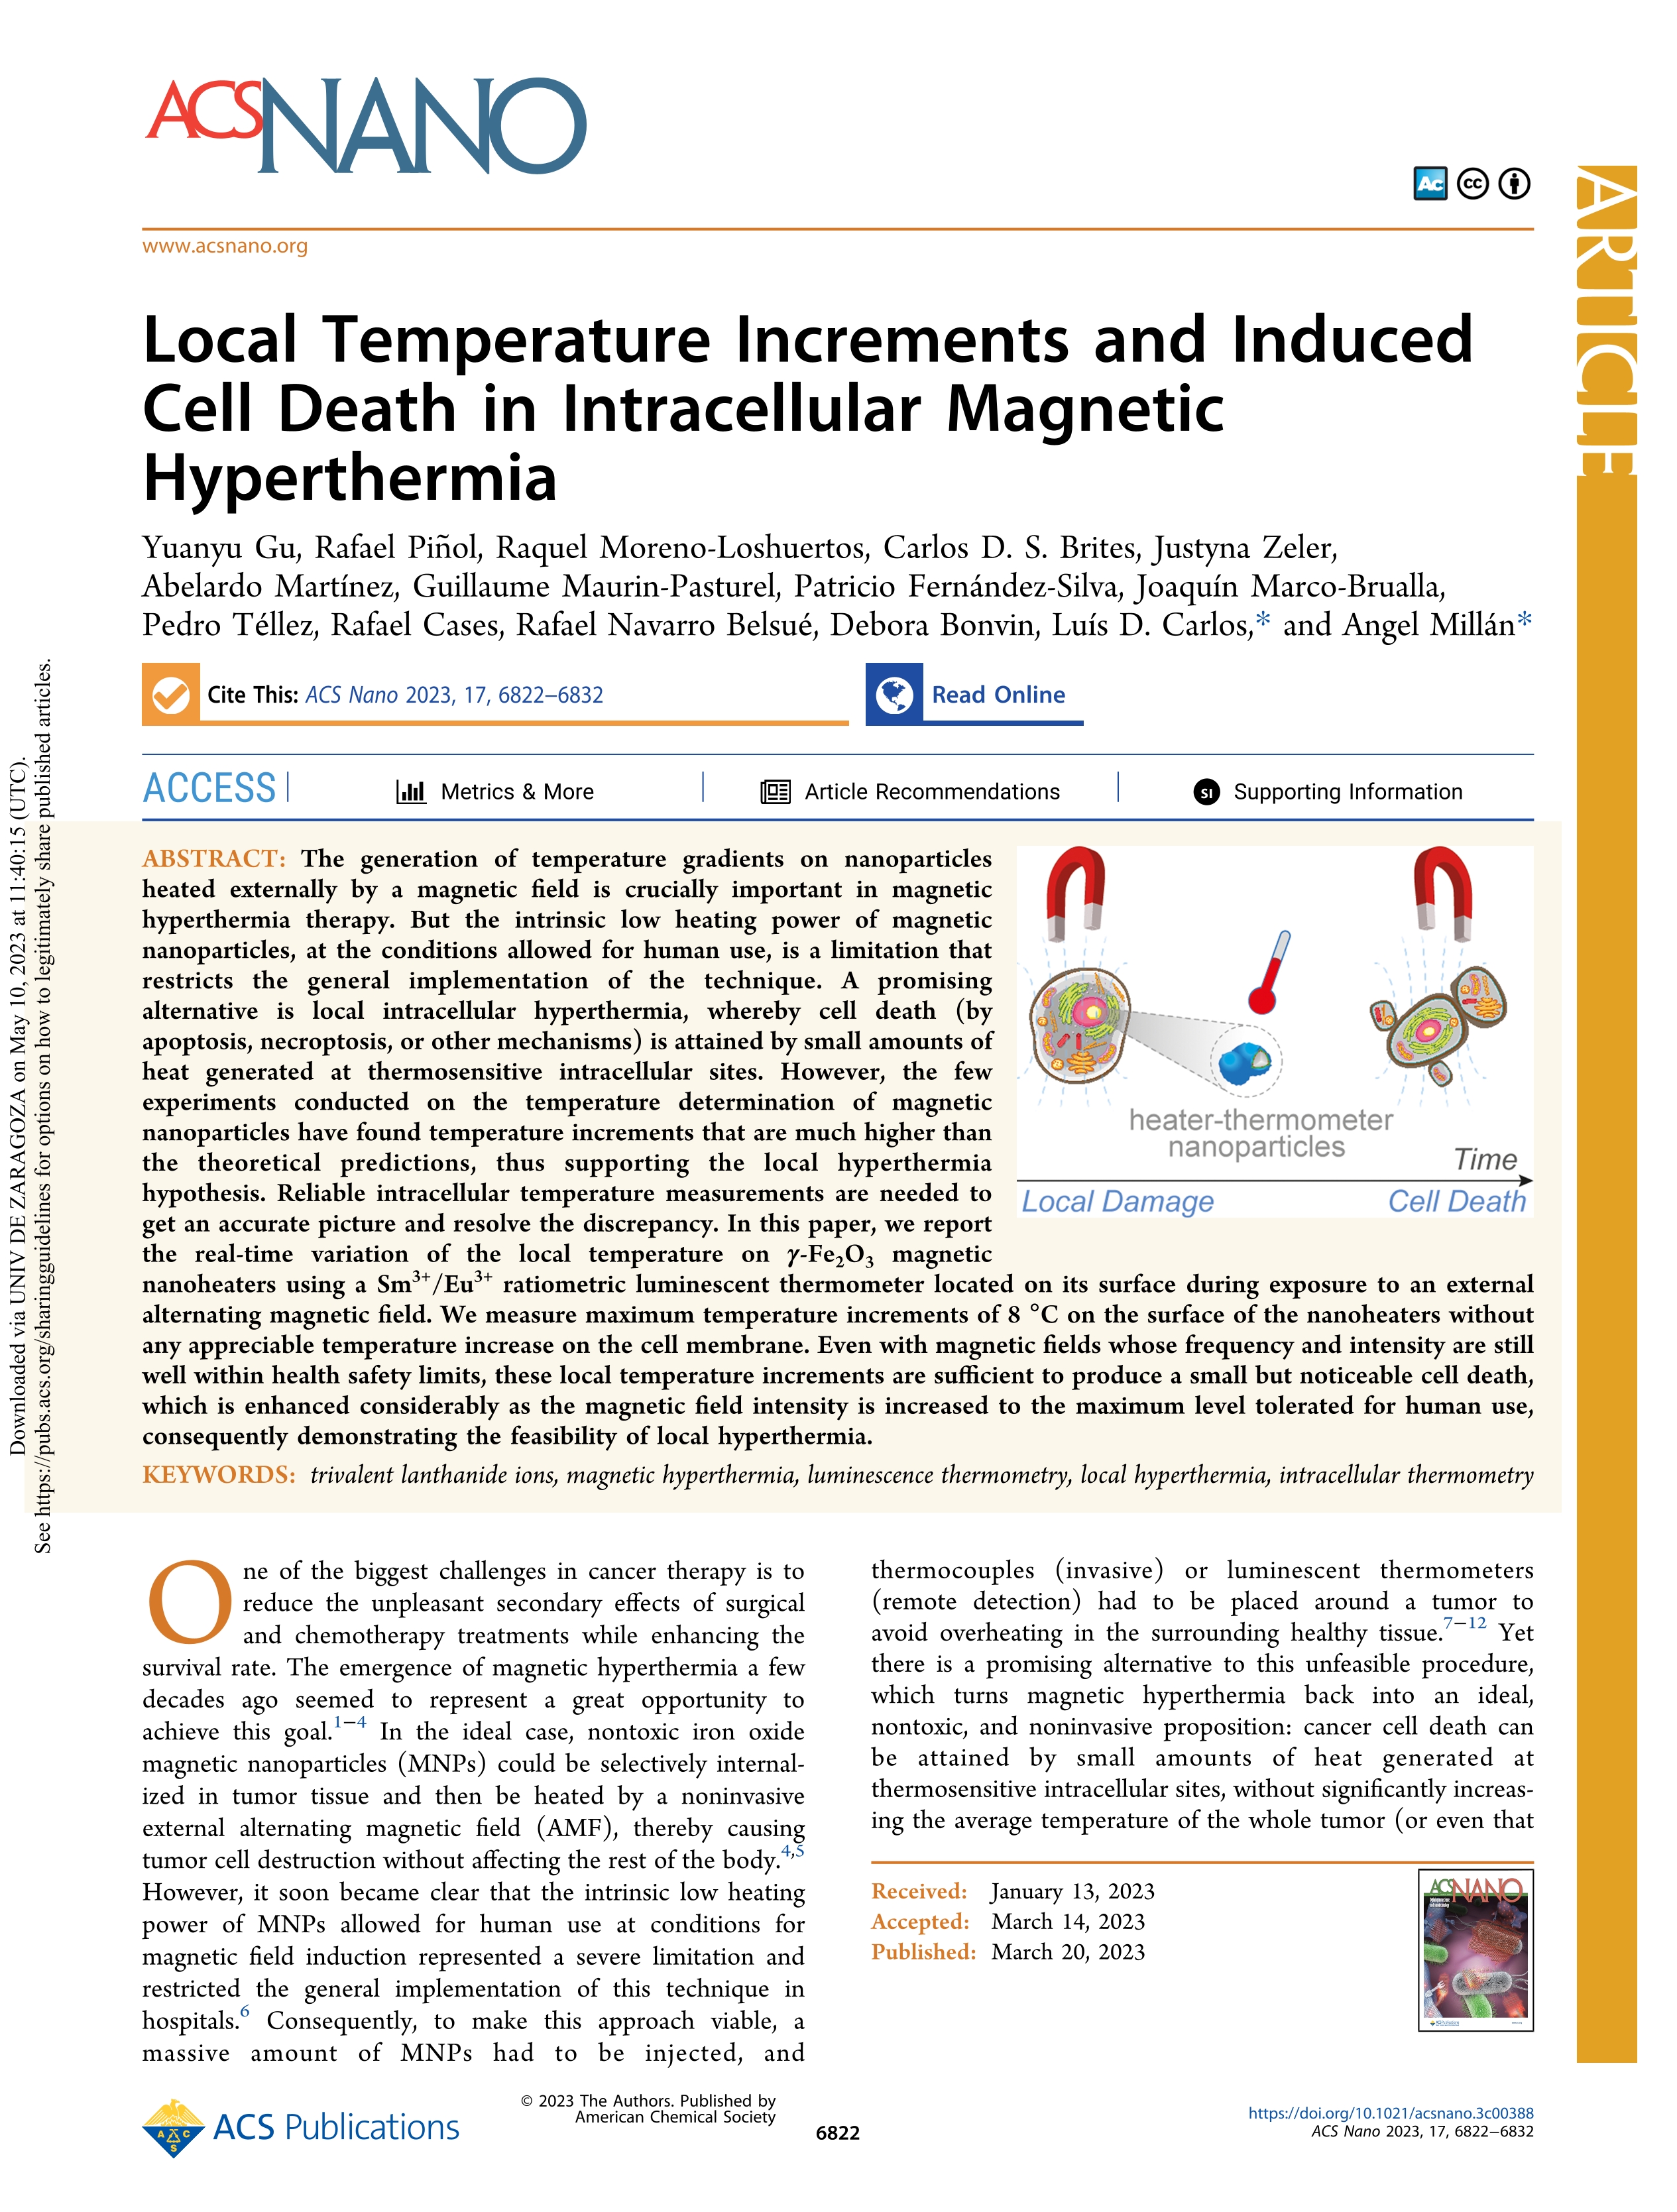 Local temperature increments and induced cell death in intracellular magnetic hyperthermia